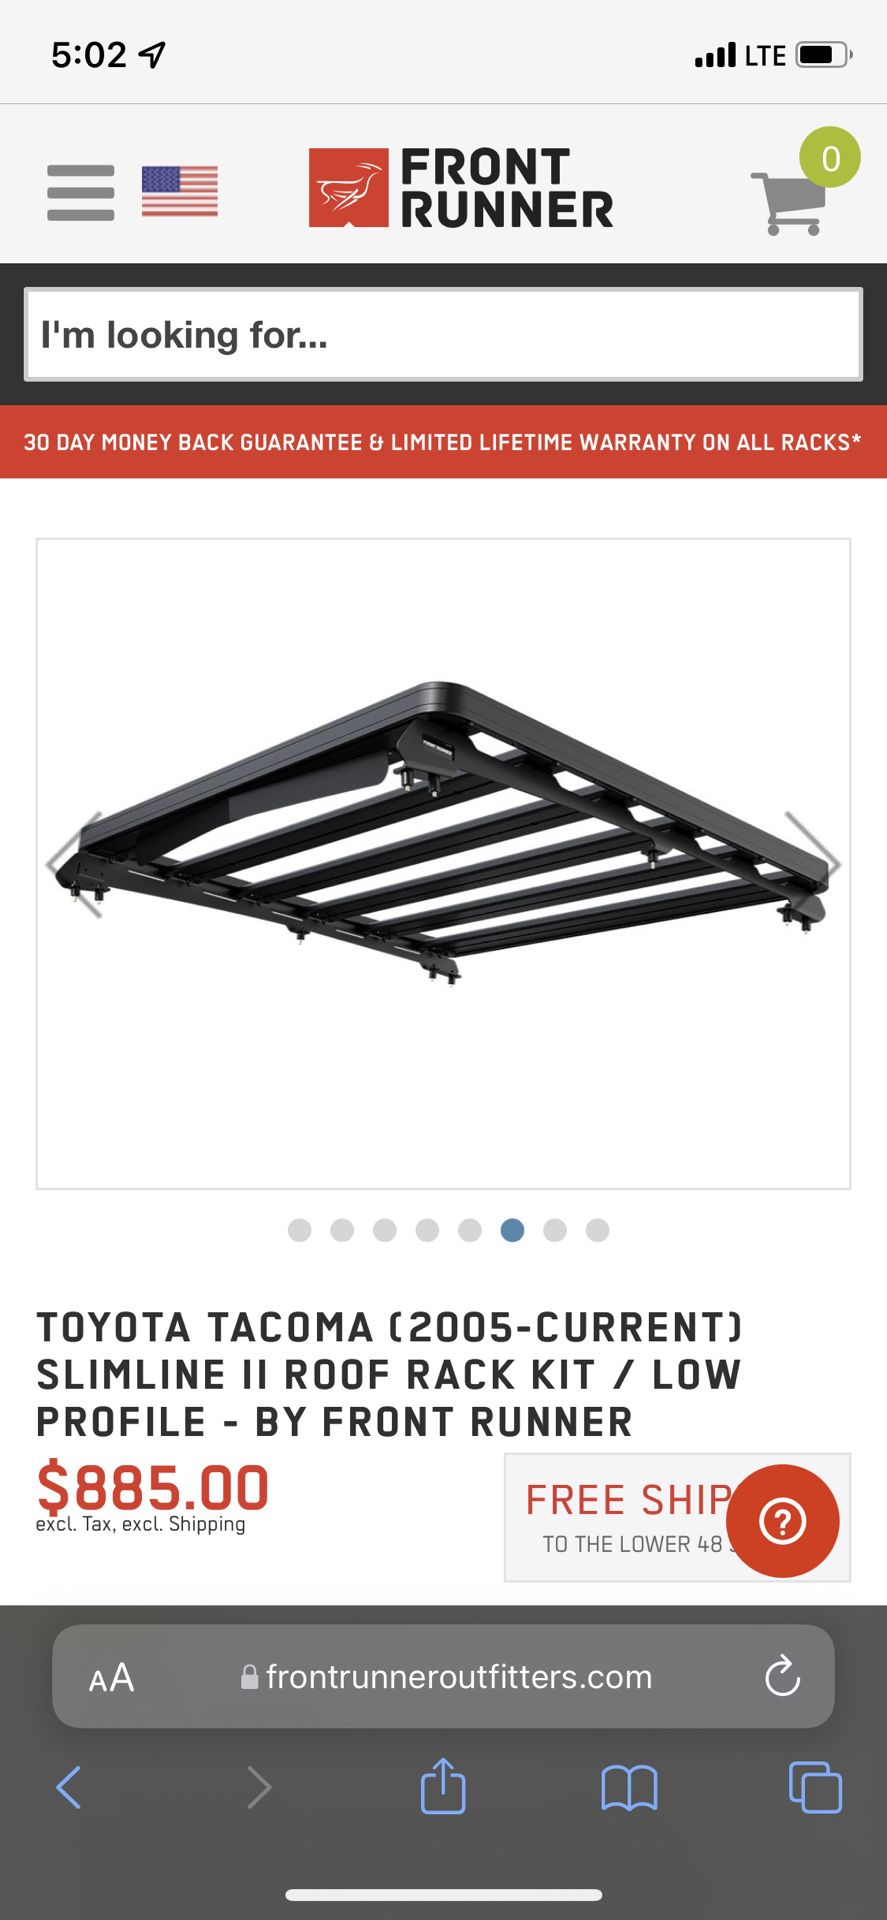 TOYOTA TACOMA (2005-CURRENT) SLIMLINE II ROOF RACK KIT / LOW PROFILE - BY FRONT RUNNER